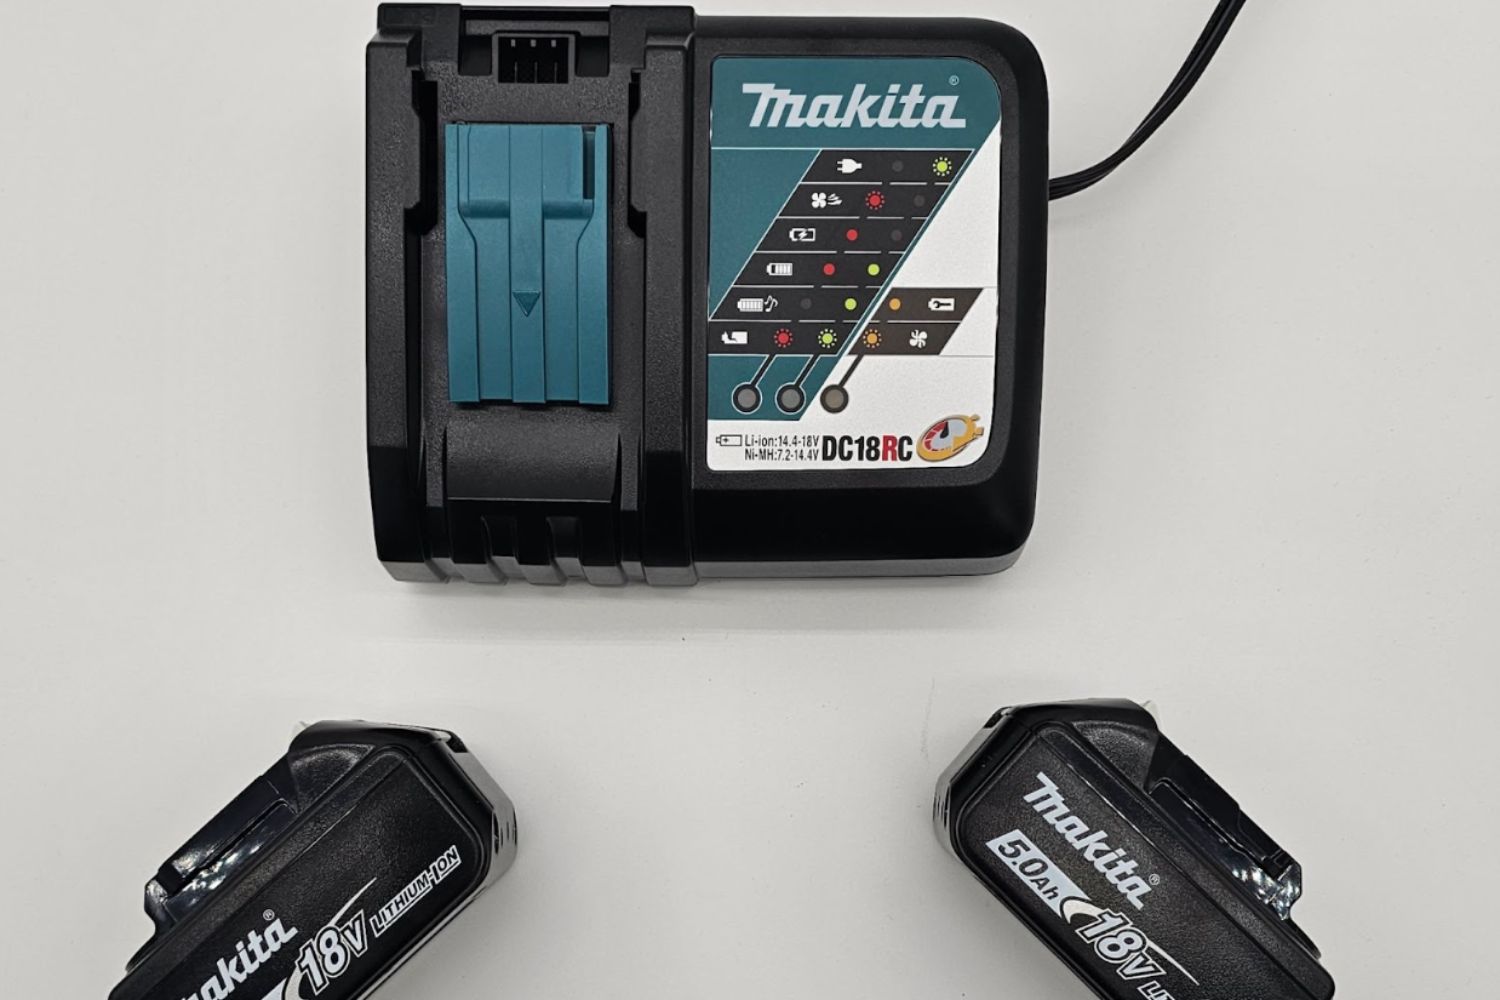 The batteries of the Makita right-angle drill laid out next to their charger